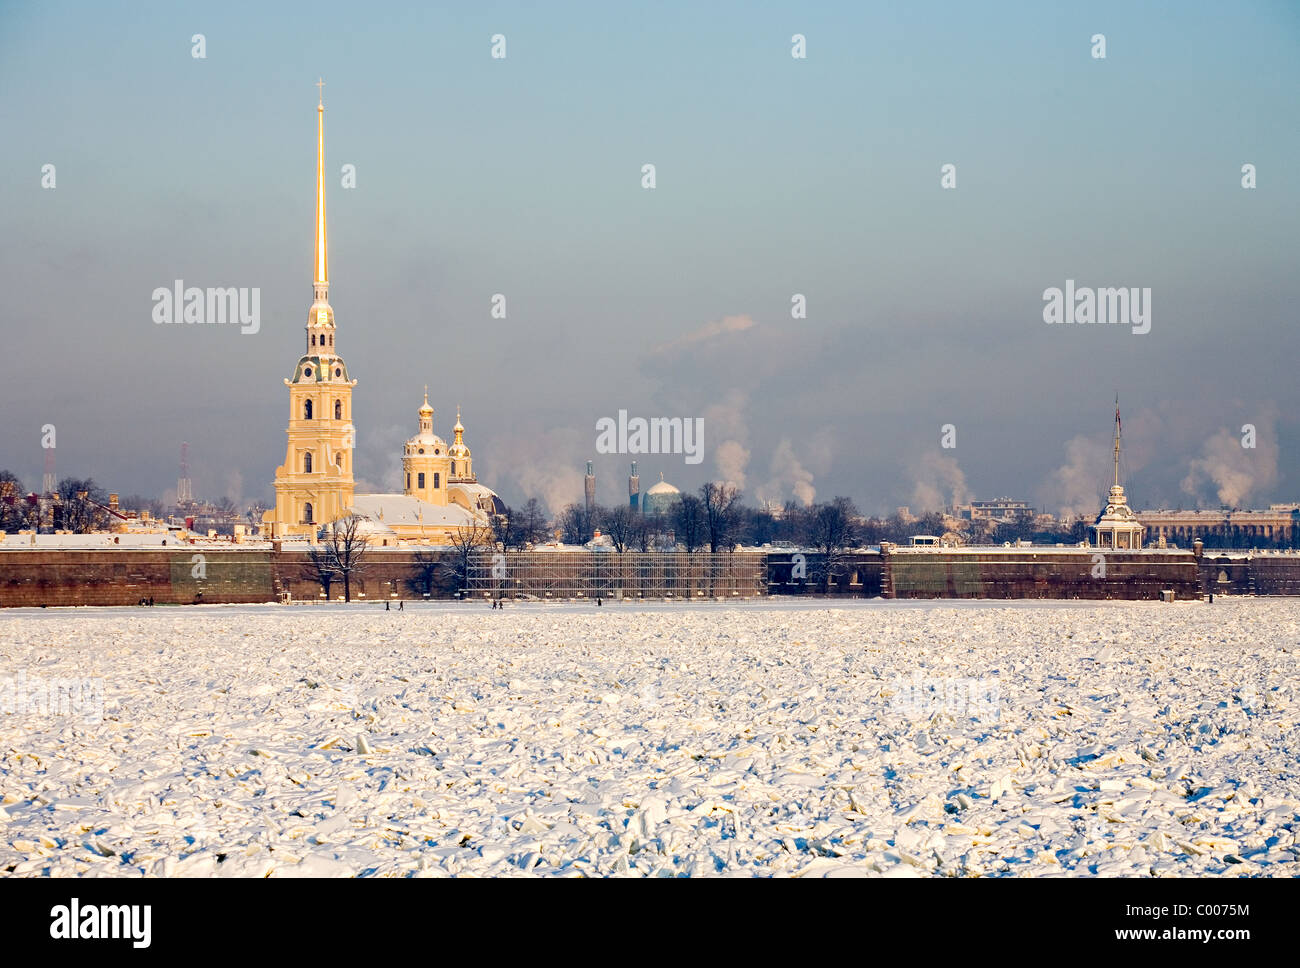 View of Peter and Paul Fortress from across the frozen Neva River St Petersburg Russia Stock Photo